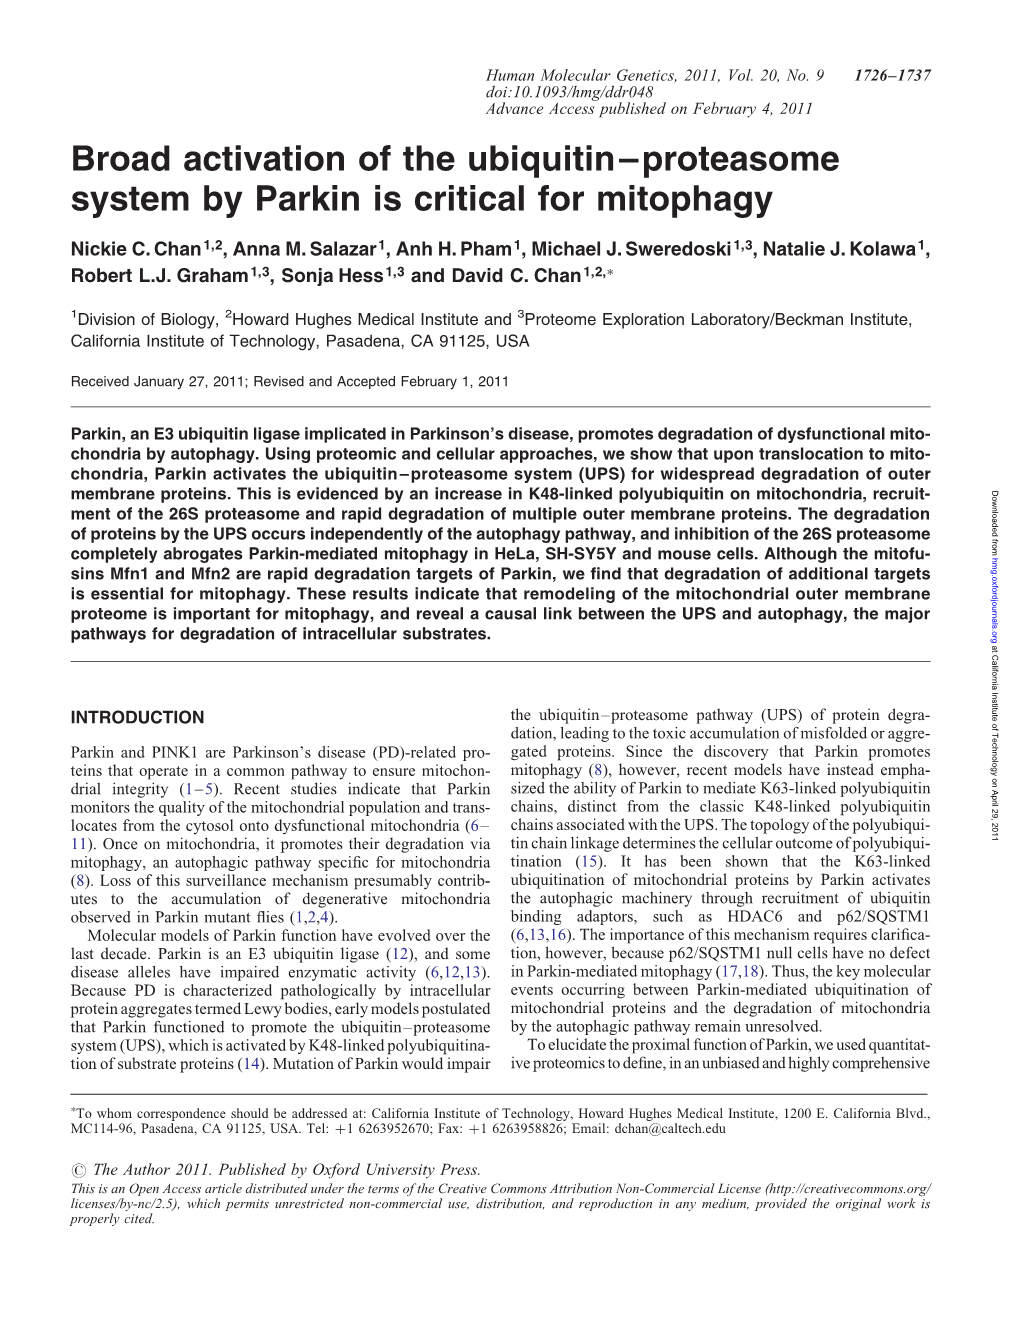 Broad Activation of the Ubiquitin–Proteasome System by Parkin Is Critical for Mitophagy